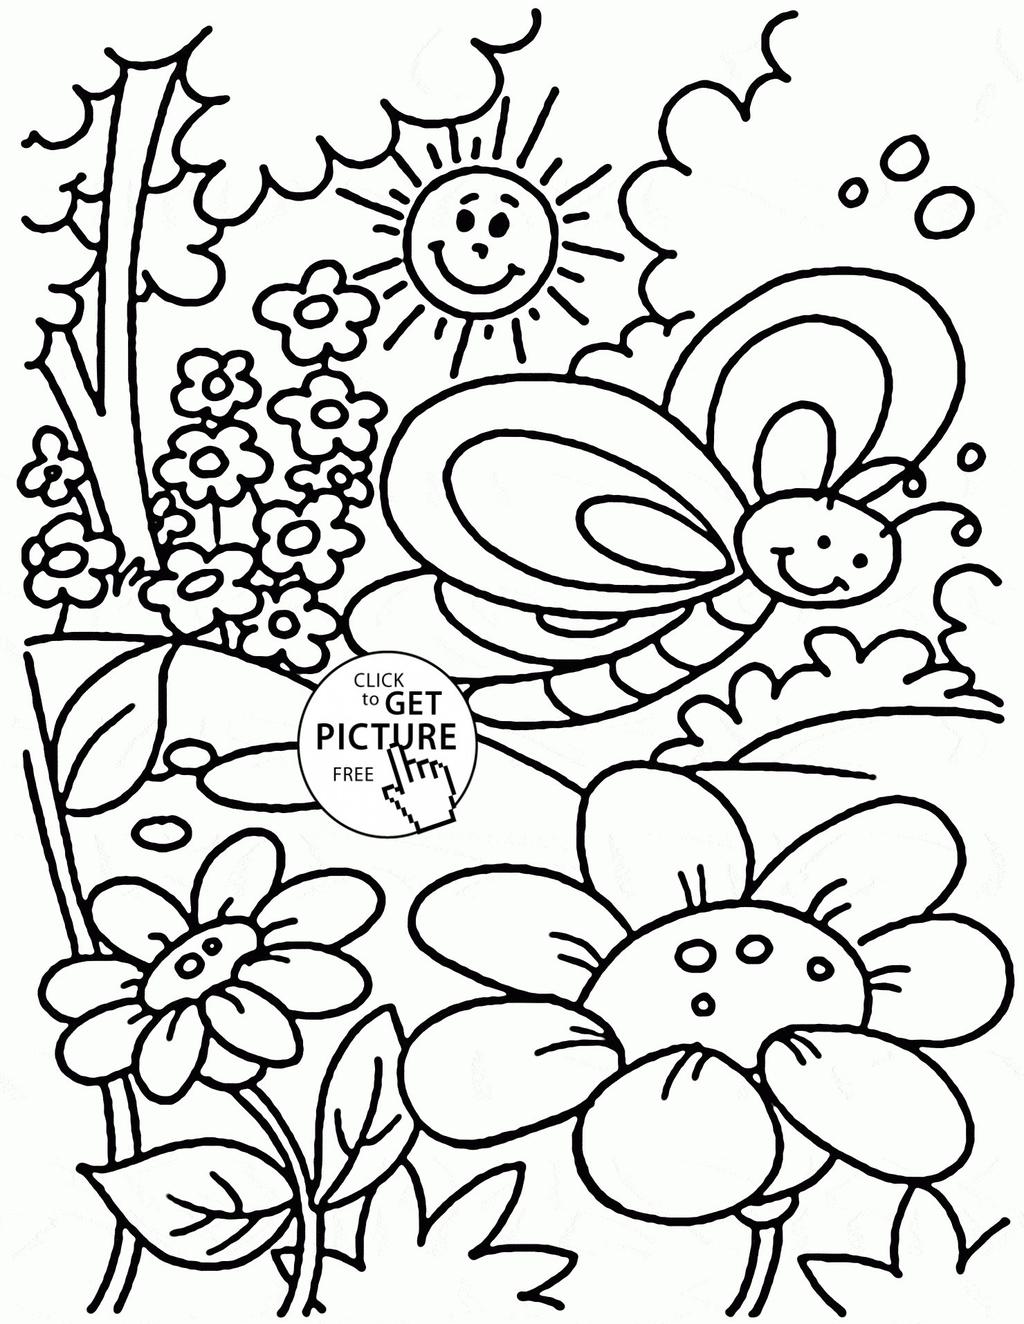 Free Springtime Coloring Pages Spring for Preschool printable